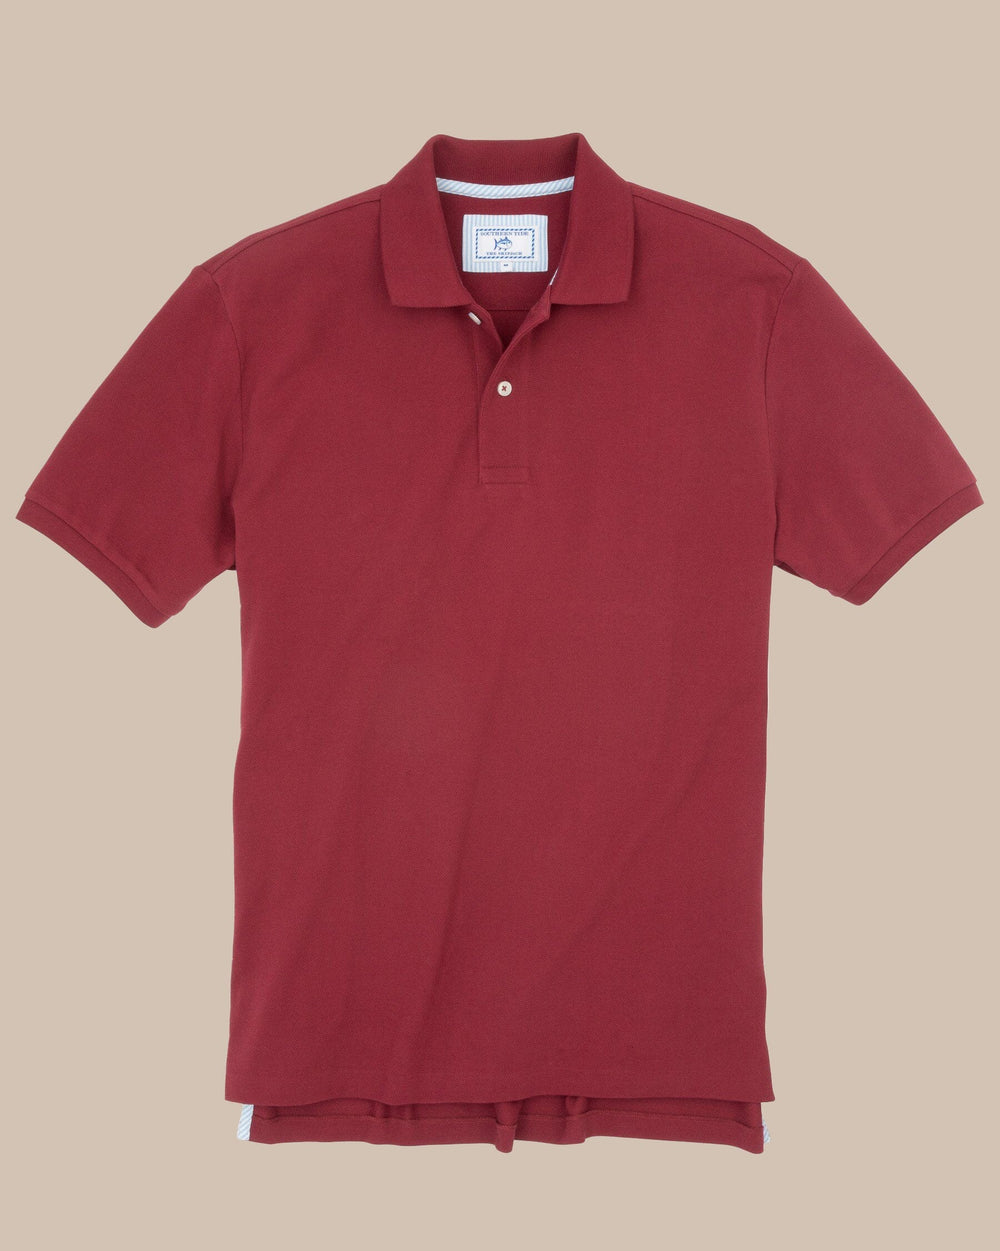 The front view of the Men's Red Skipjack Gameday Colors Polo Shirt by Southern Tide - Chianti